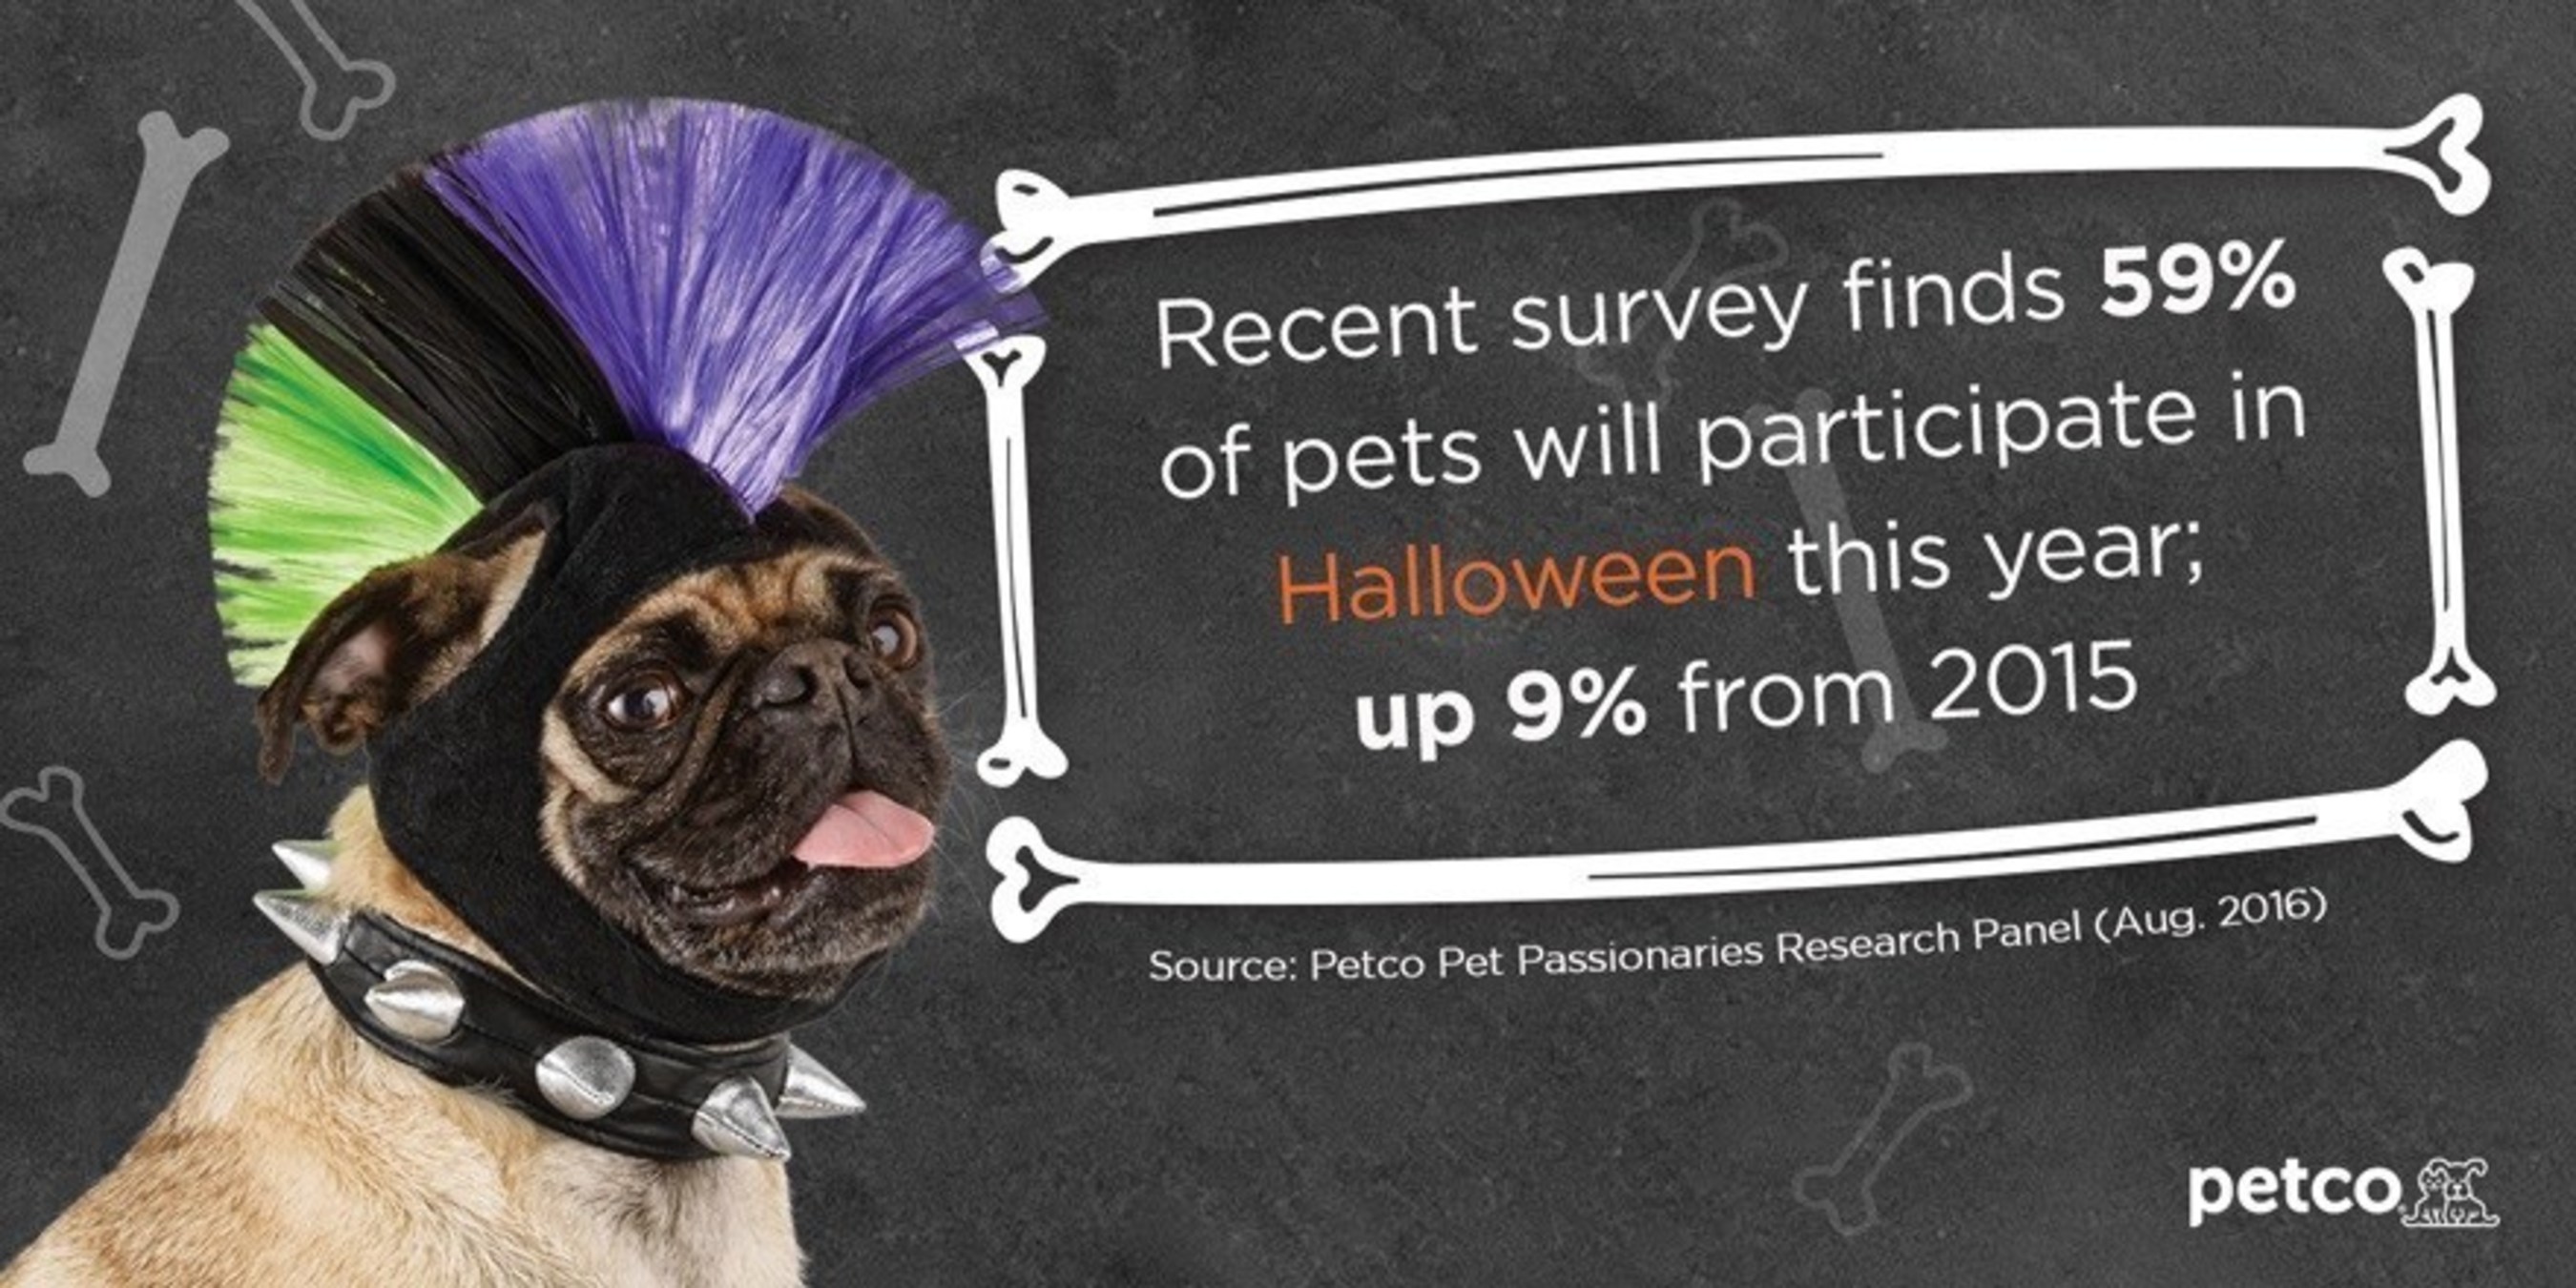 According to a recent Petco survey*, 59 percent of pet parents say their pet will participate in Halloween this year, a 9 percent increase from 2015